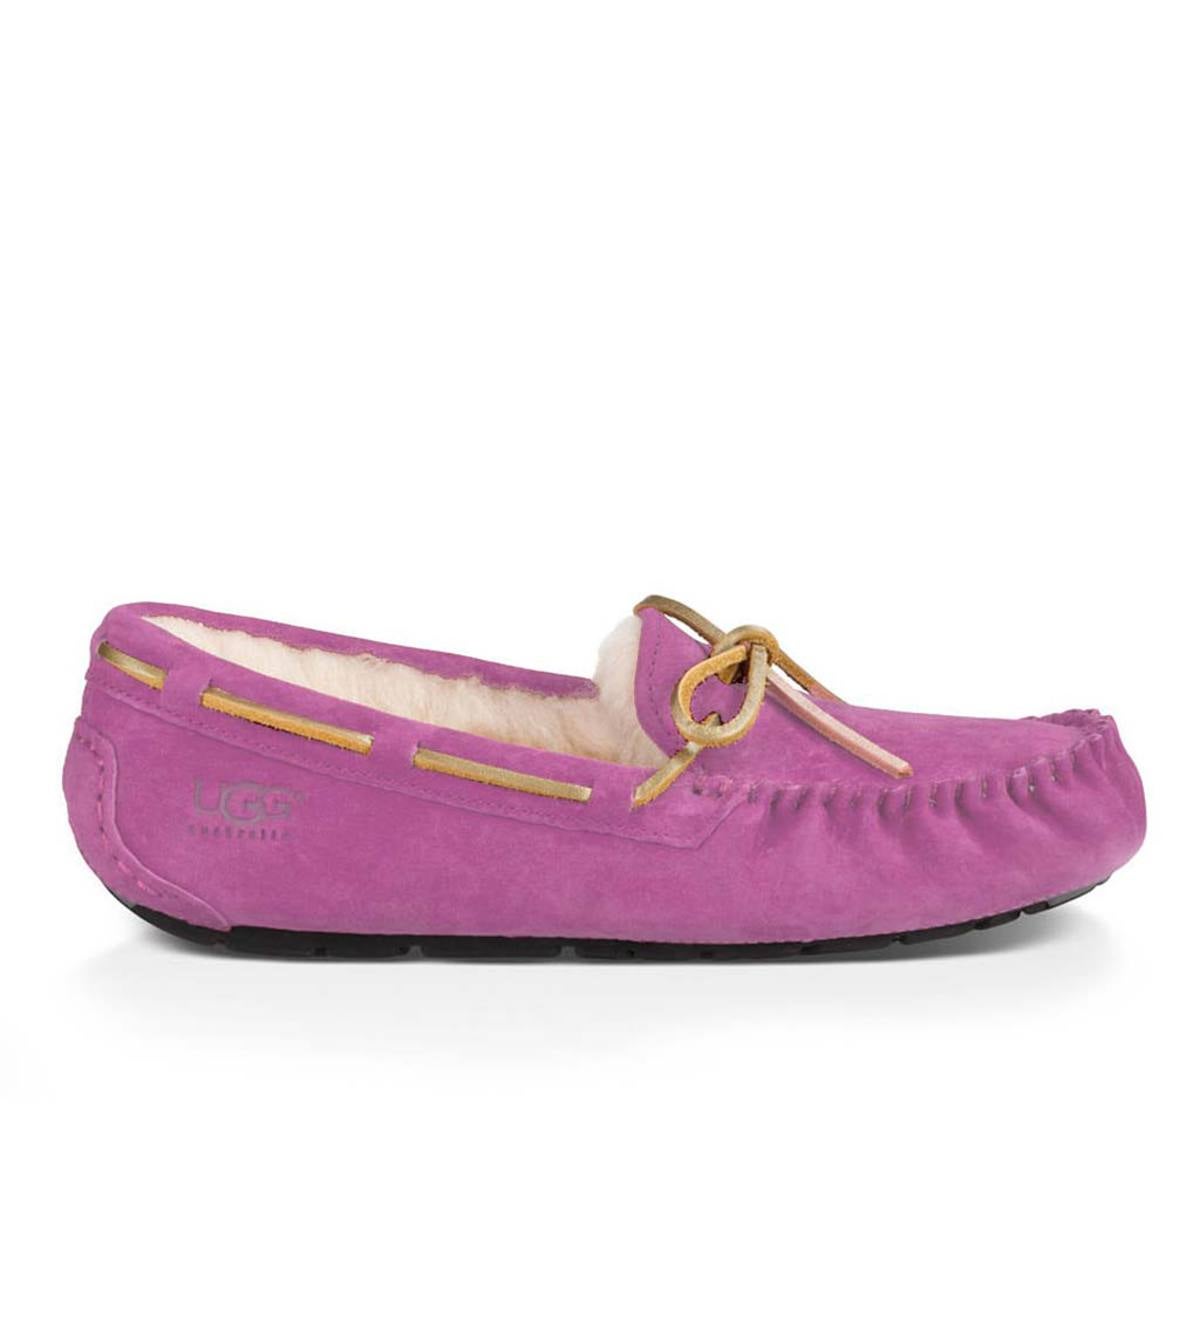 UGG Ansley Moccasin Slippers - Bodacious - Size 9